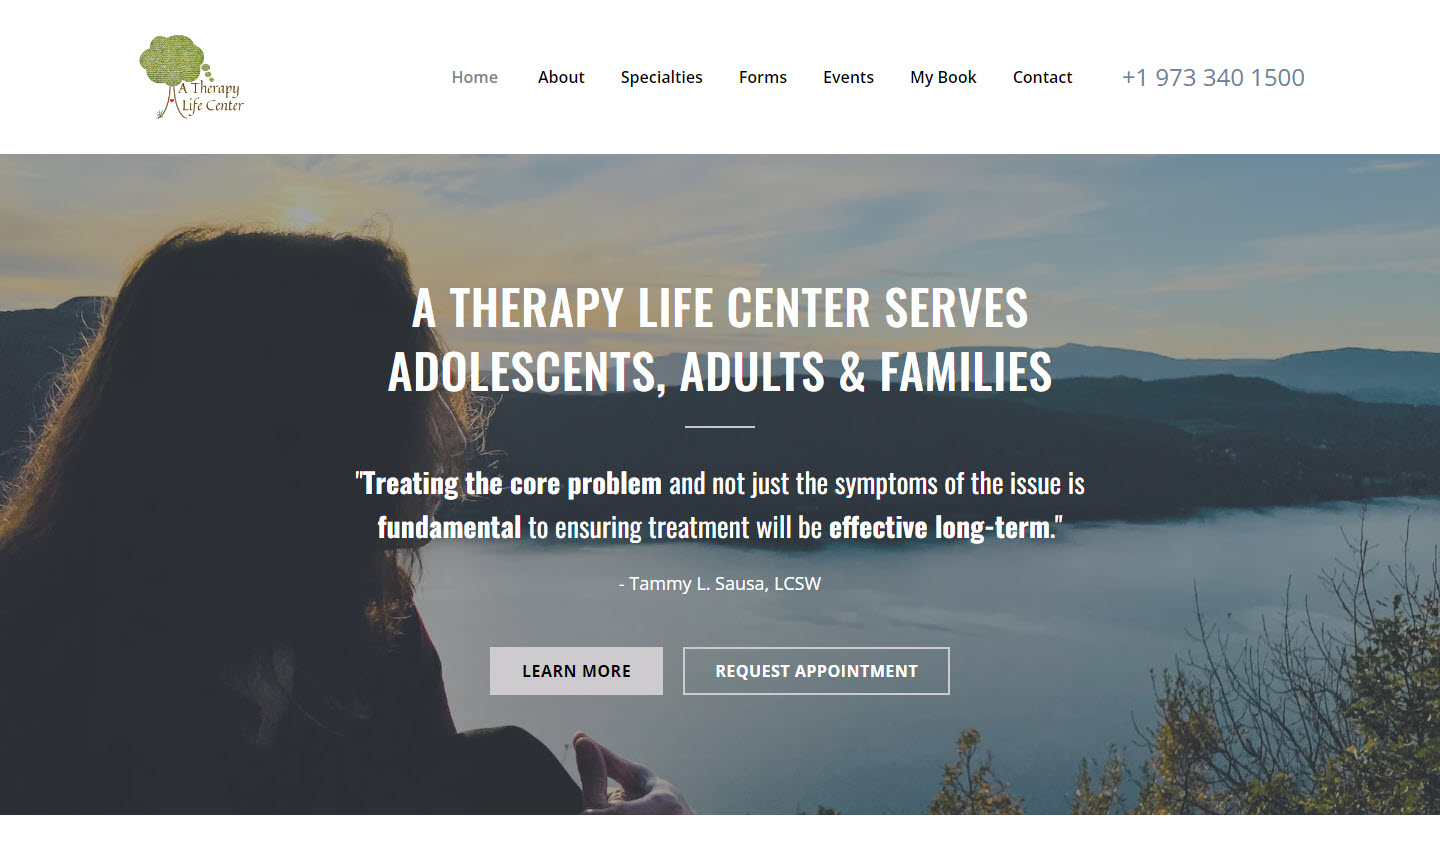 A Therapy Lie Cetner Serves Adolescents, Adults & Families